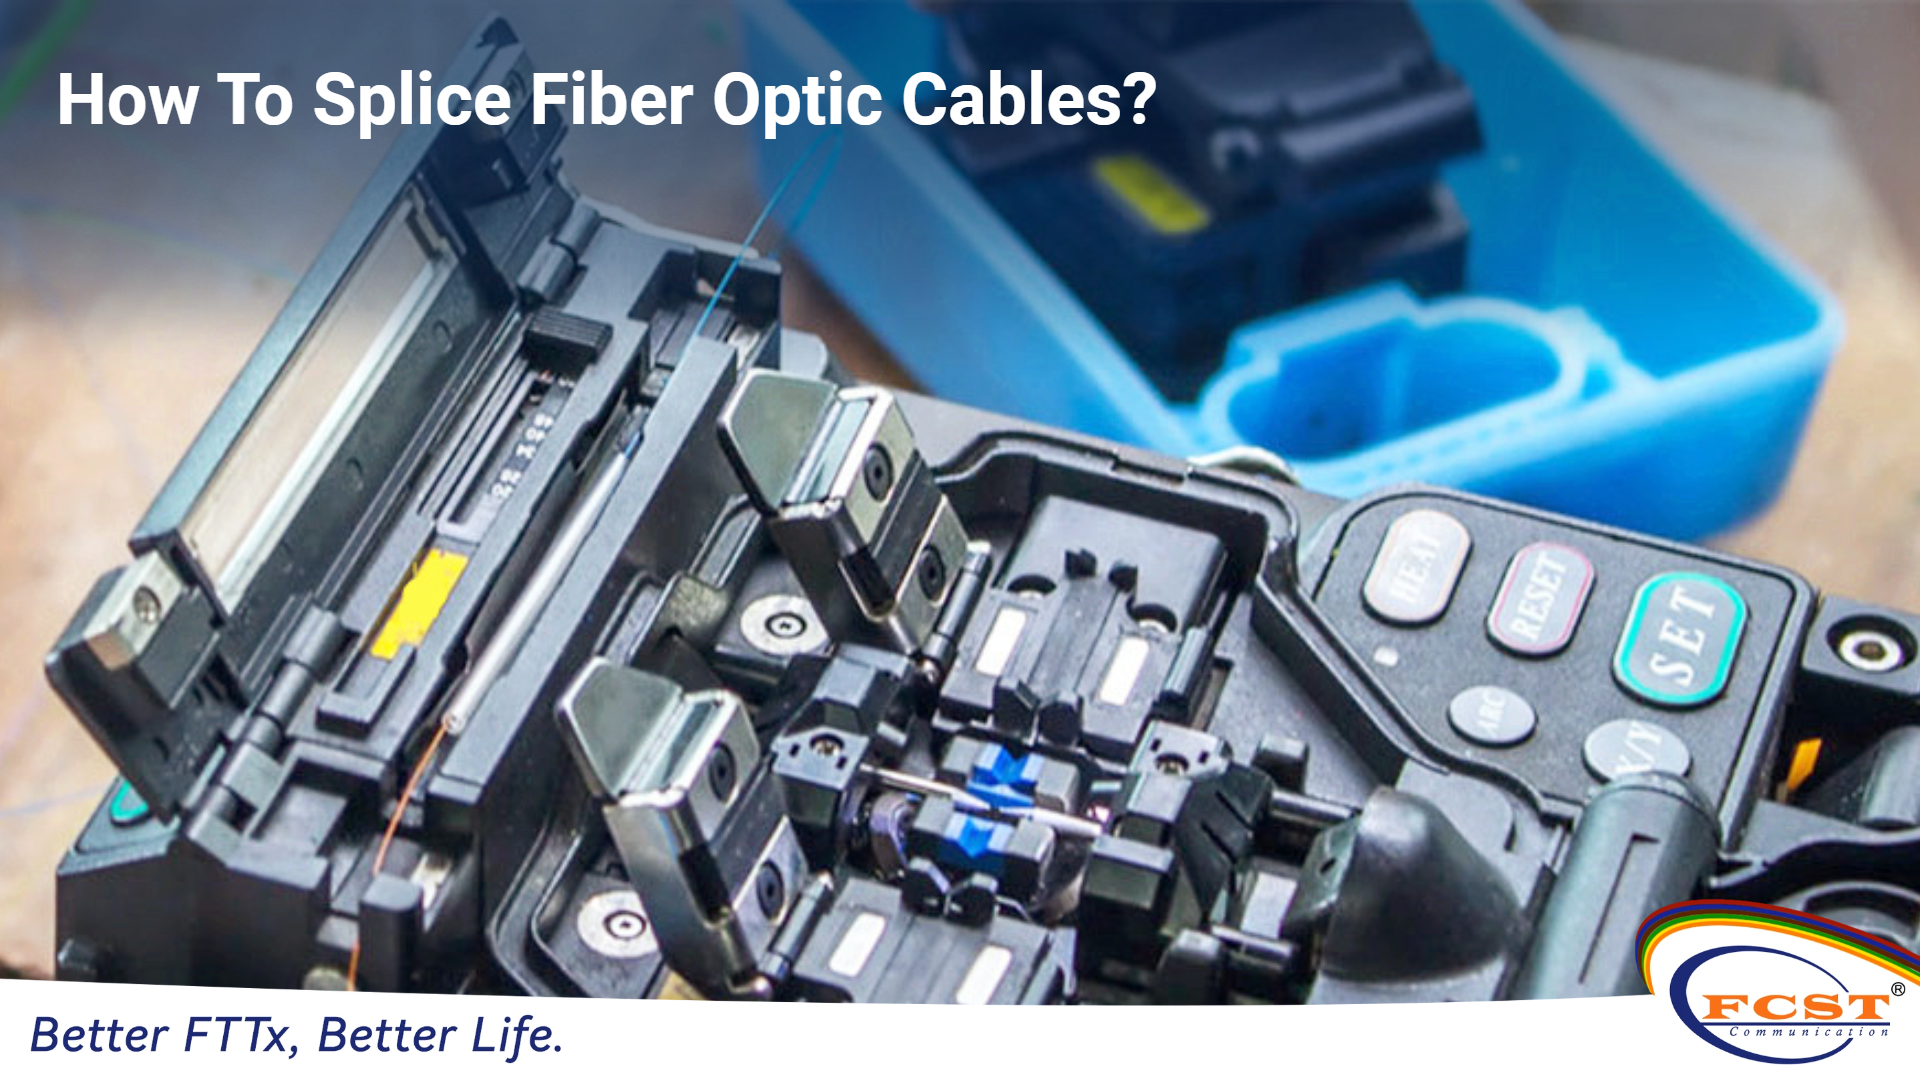 How To Splice Fiber Optic Cables?